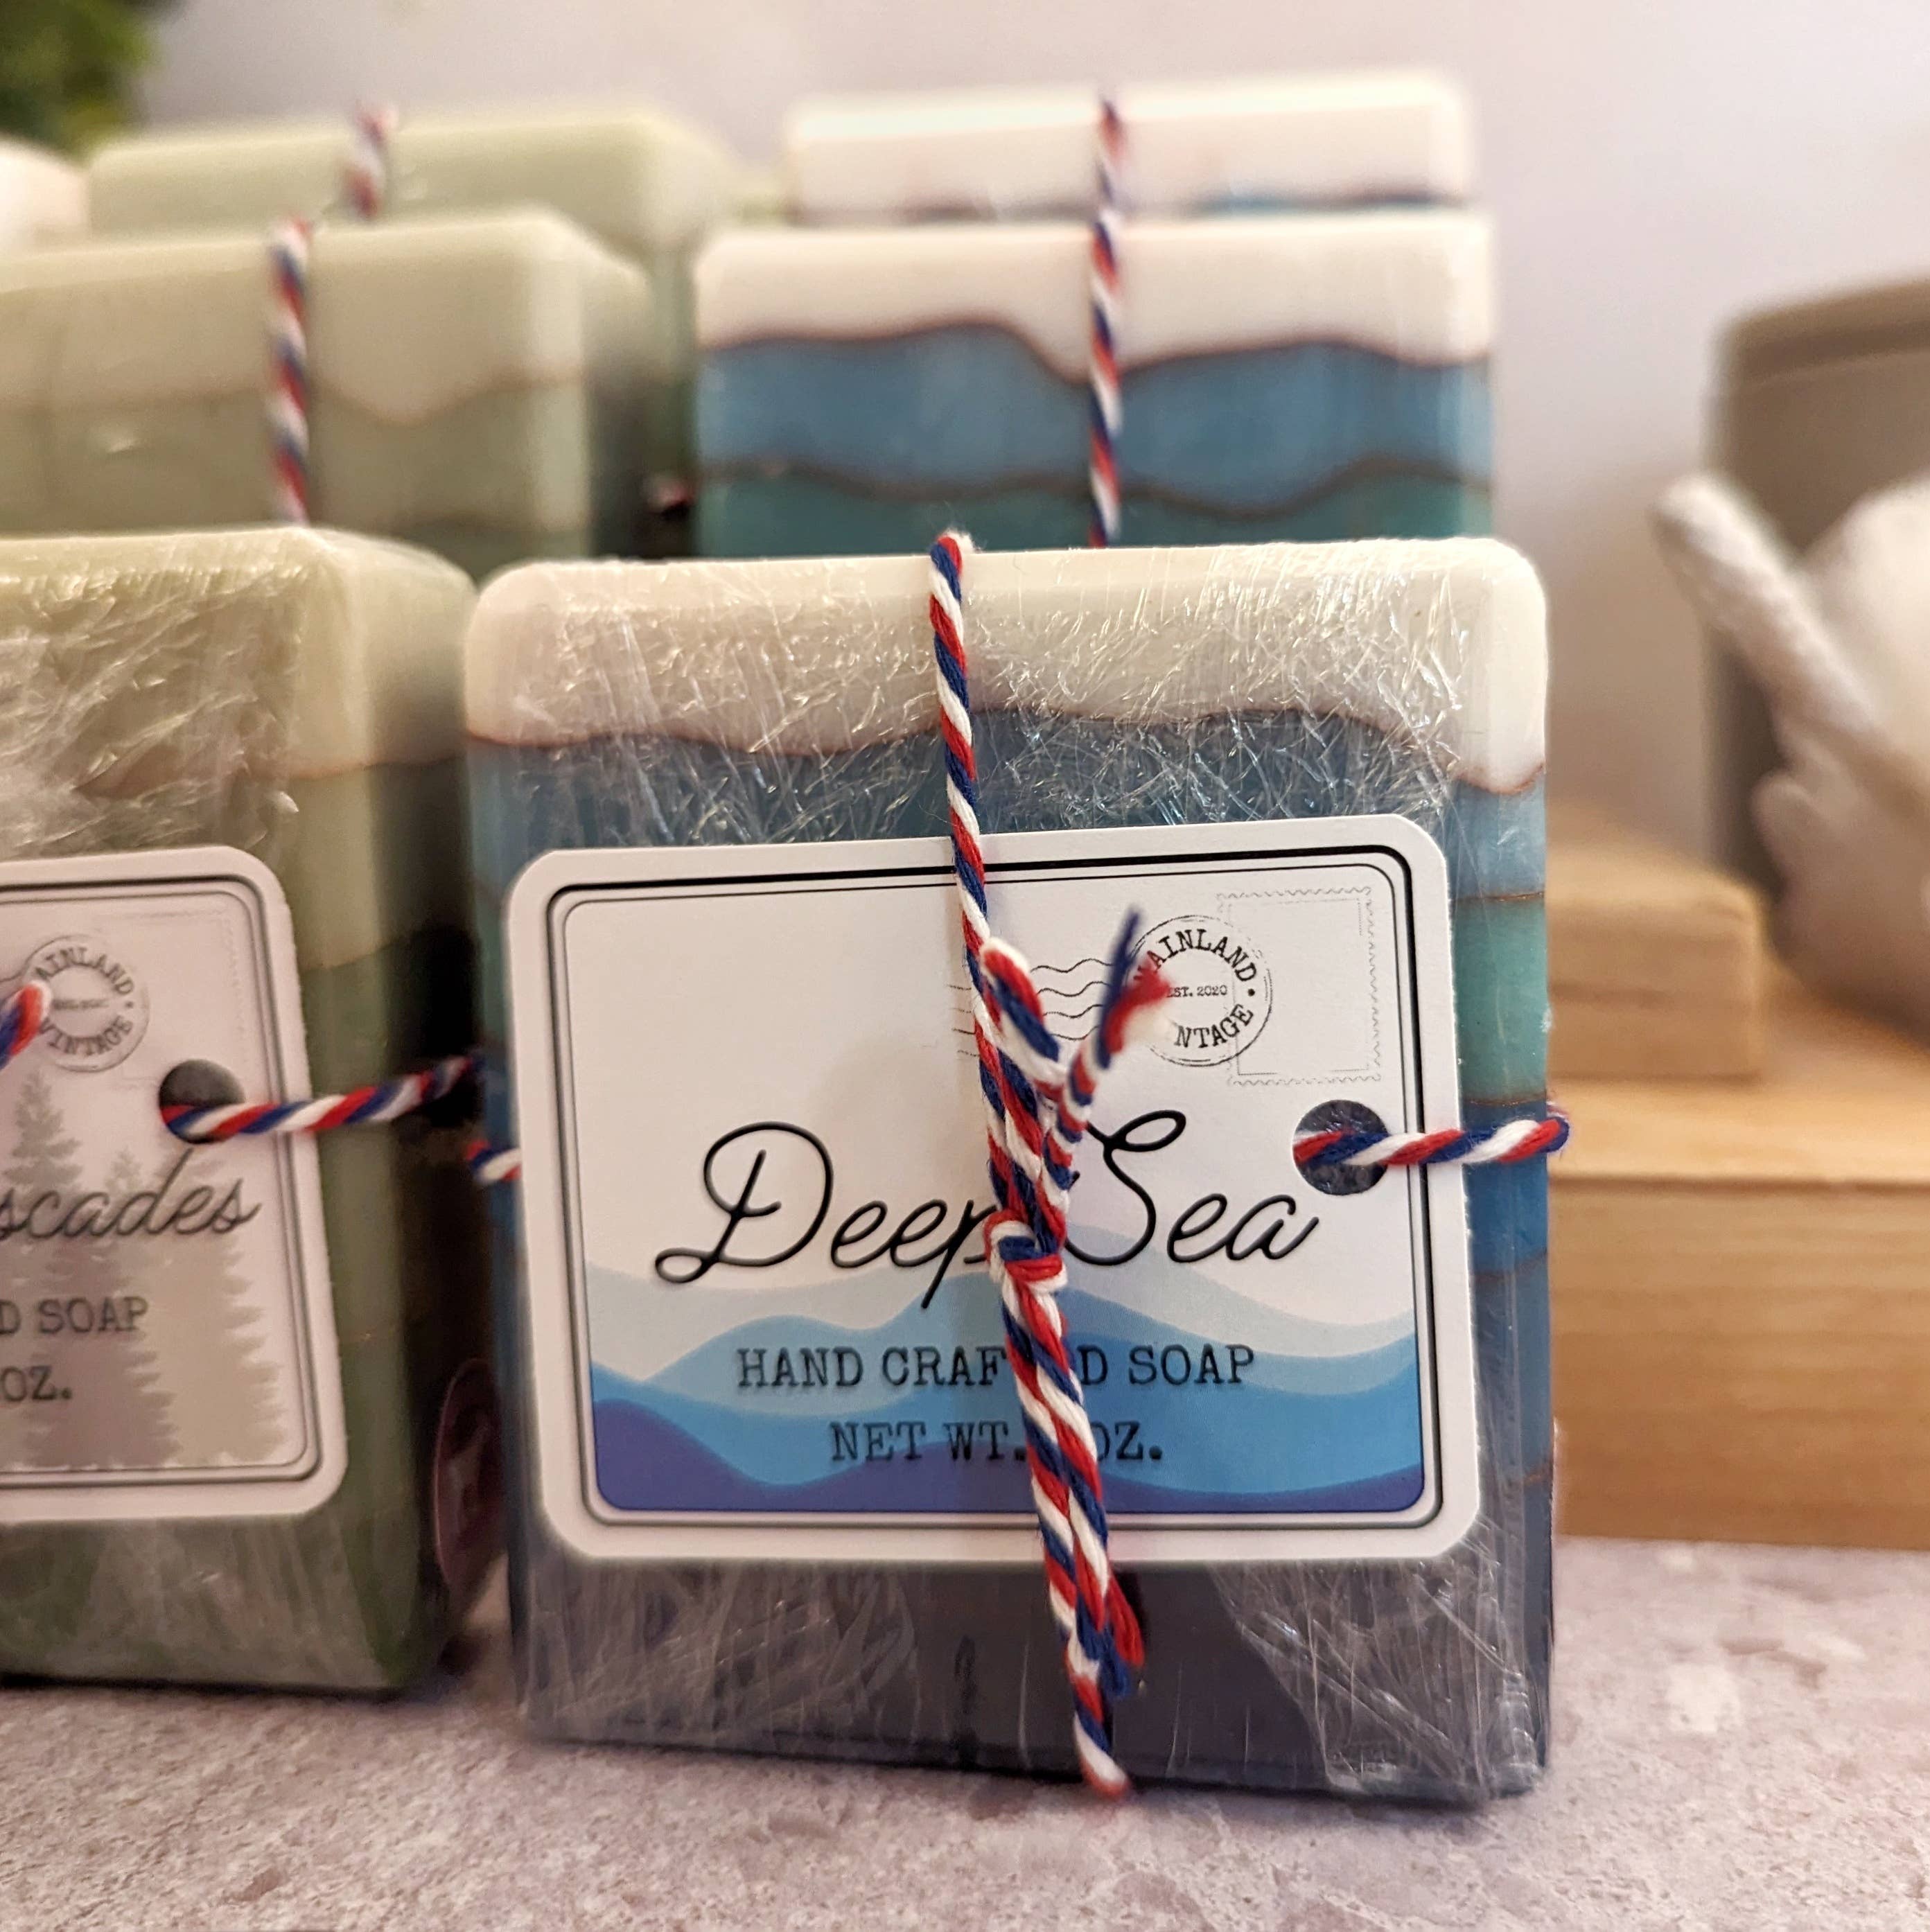 Deep Sea hand crafted soap